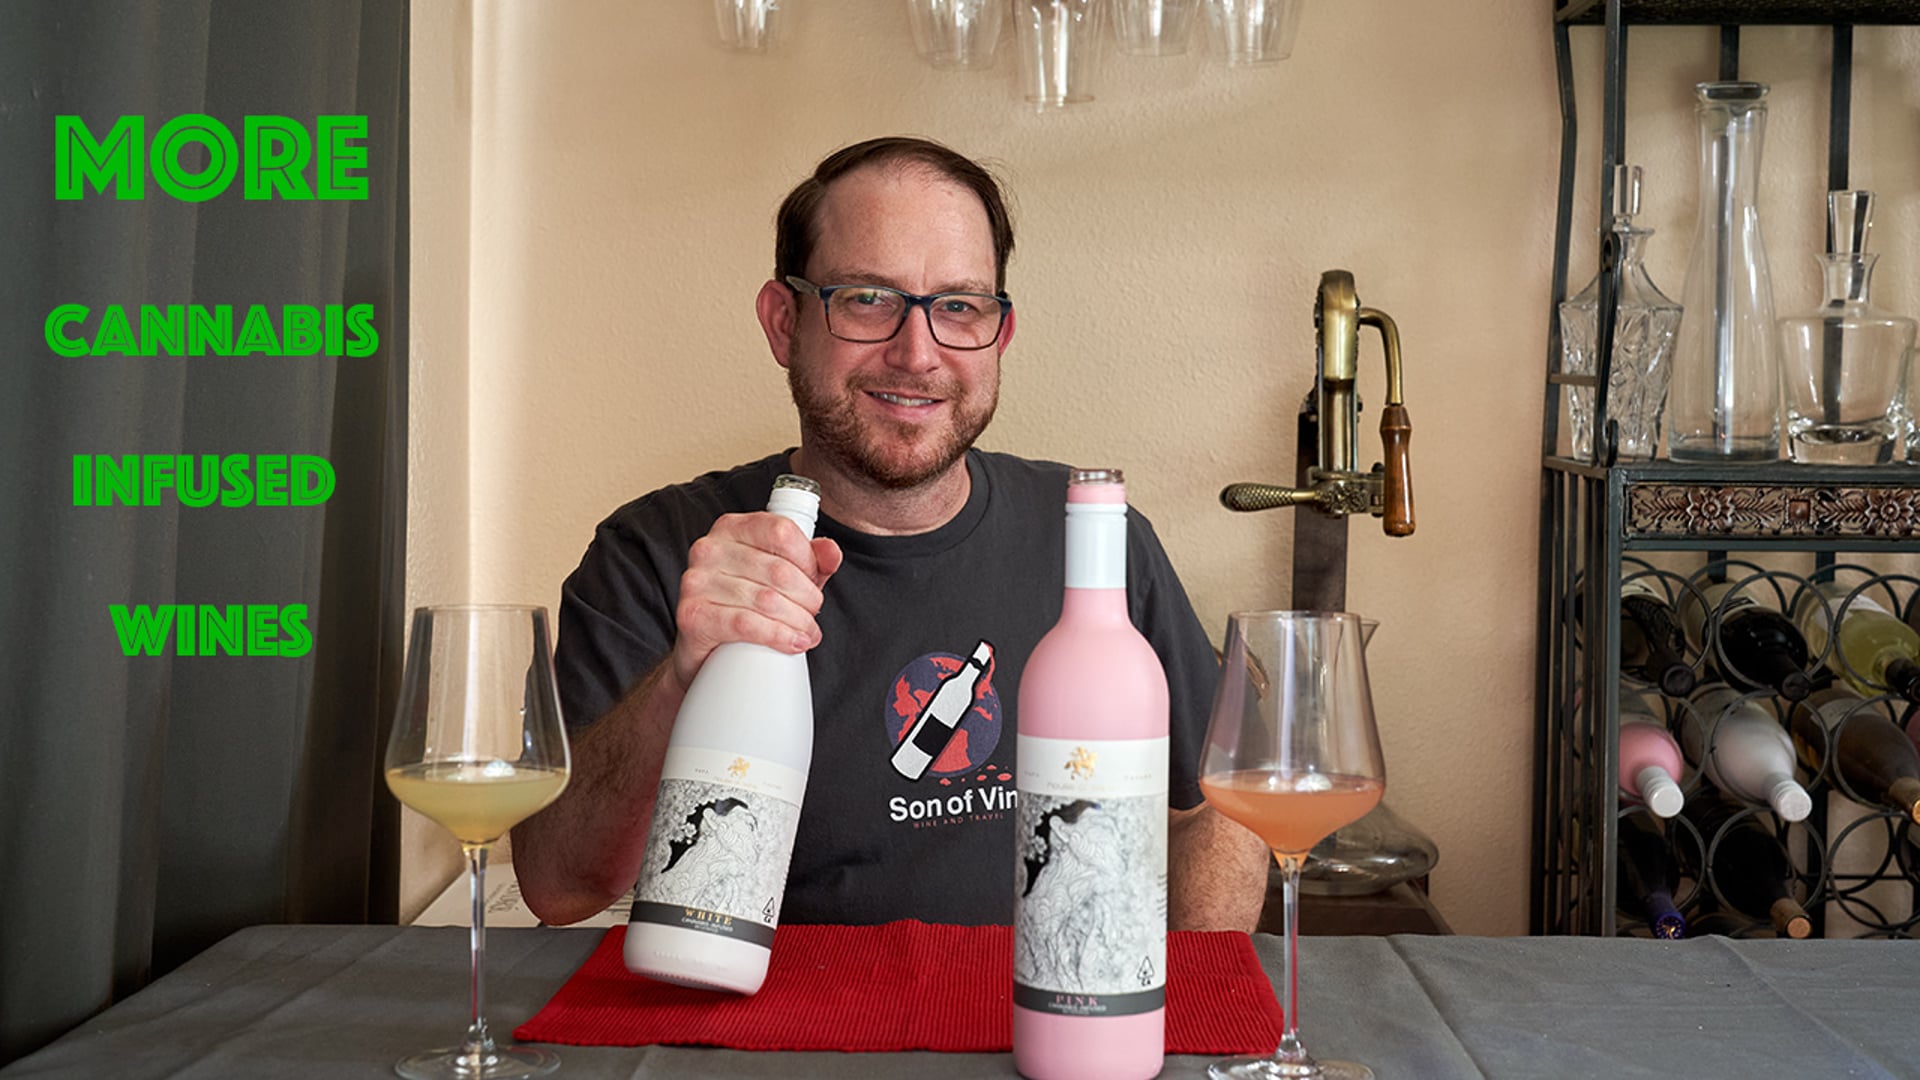 Watch Cannabis infused wines by House of Saka on our Free Roku Channel